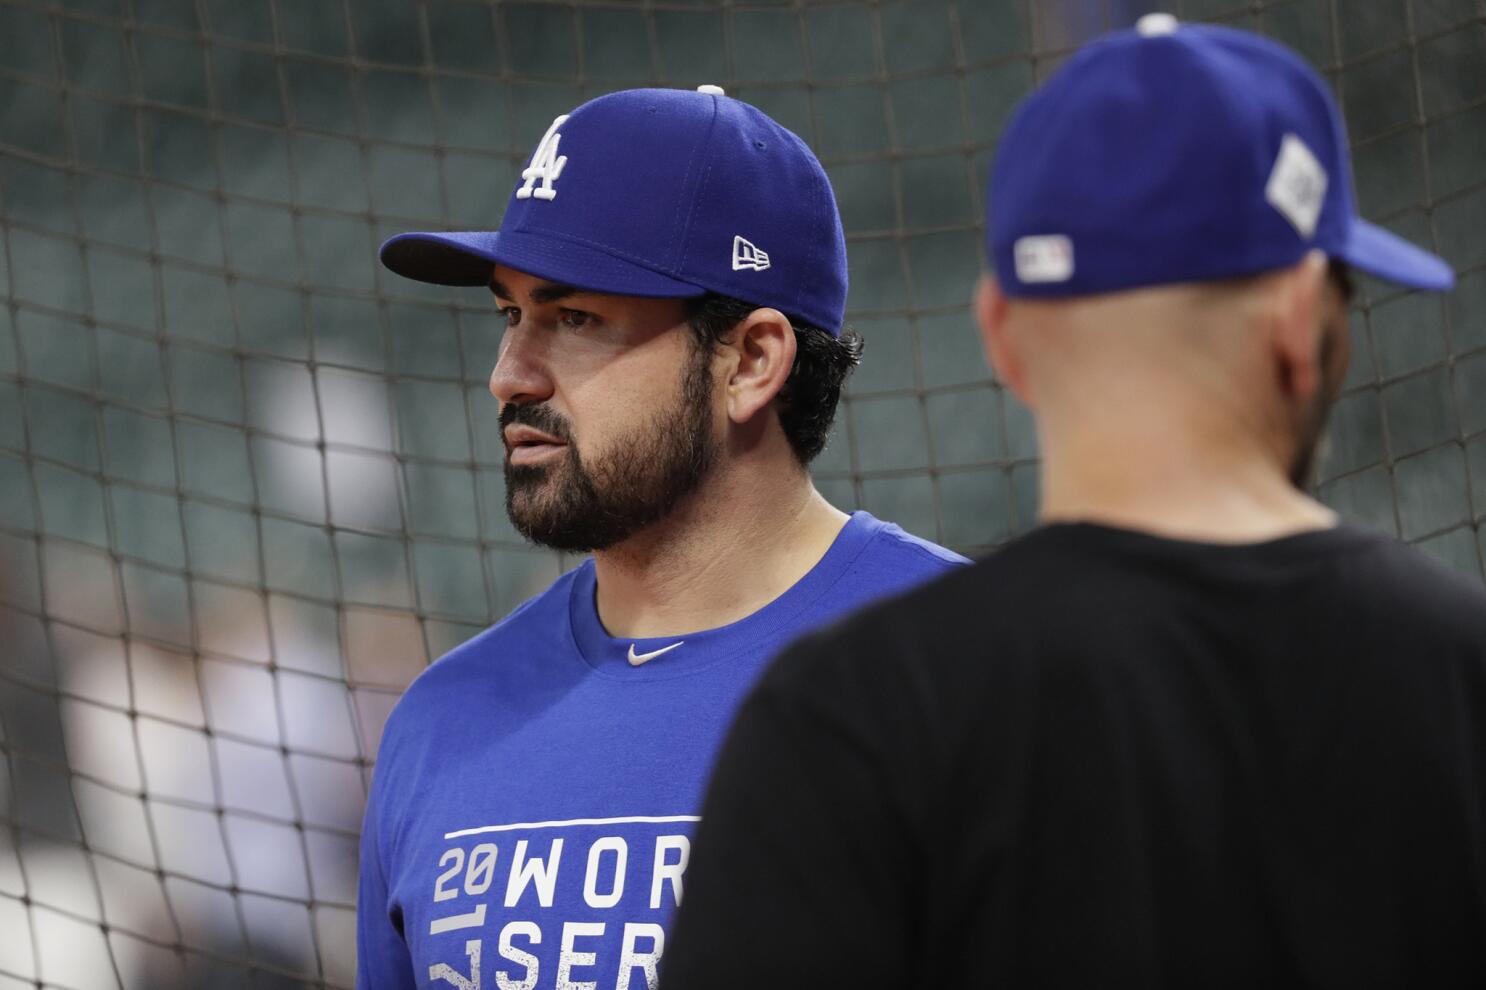 Adrian Gonzalez might be done with Dodgers after awkward ending to